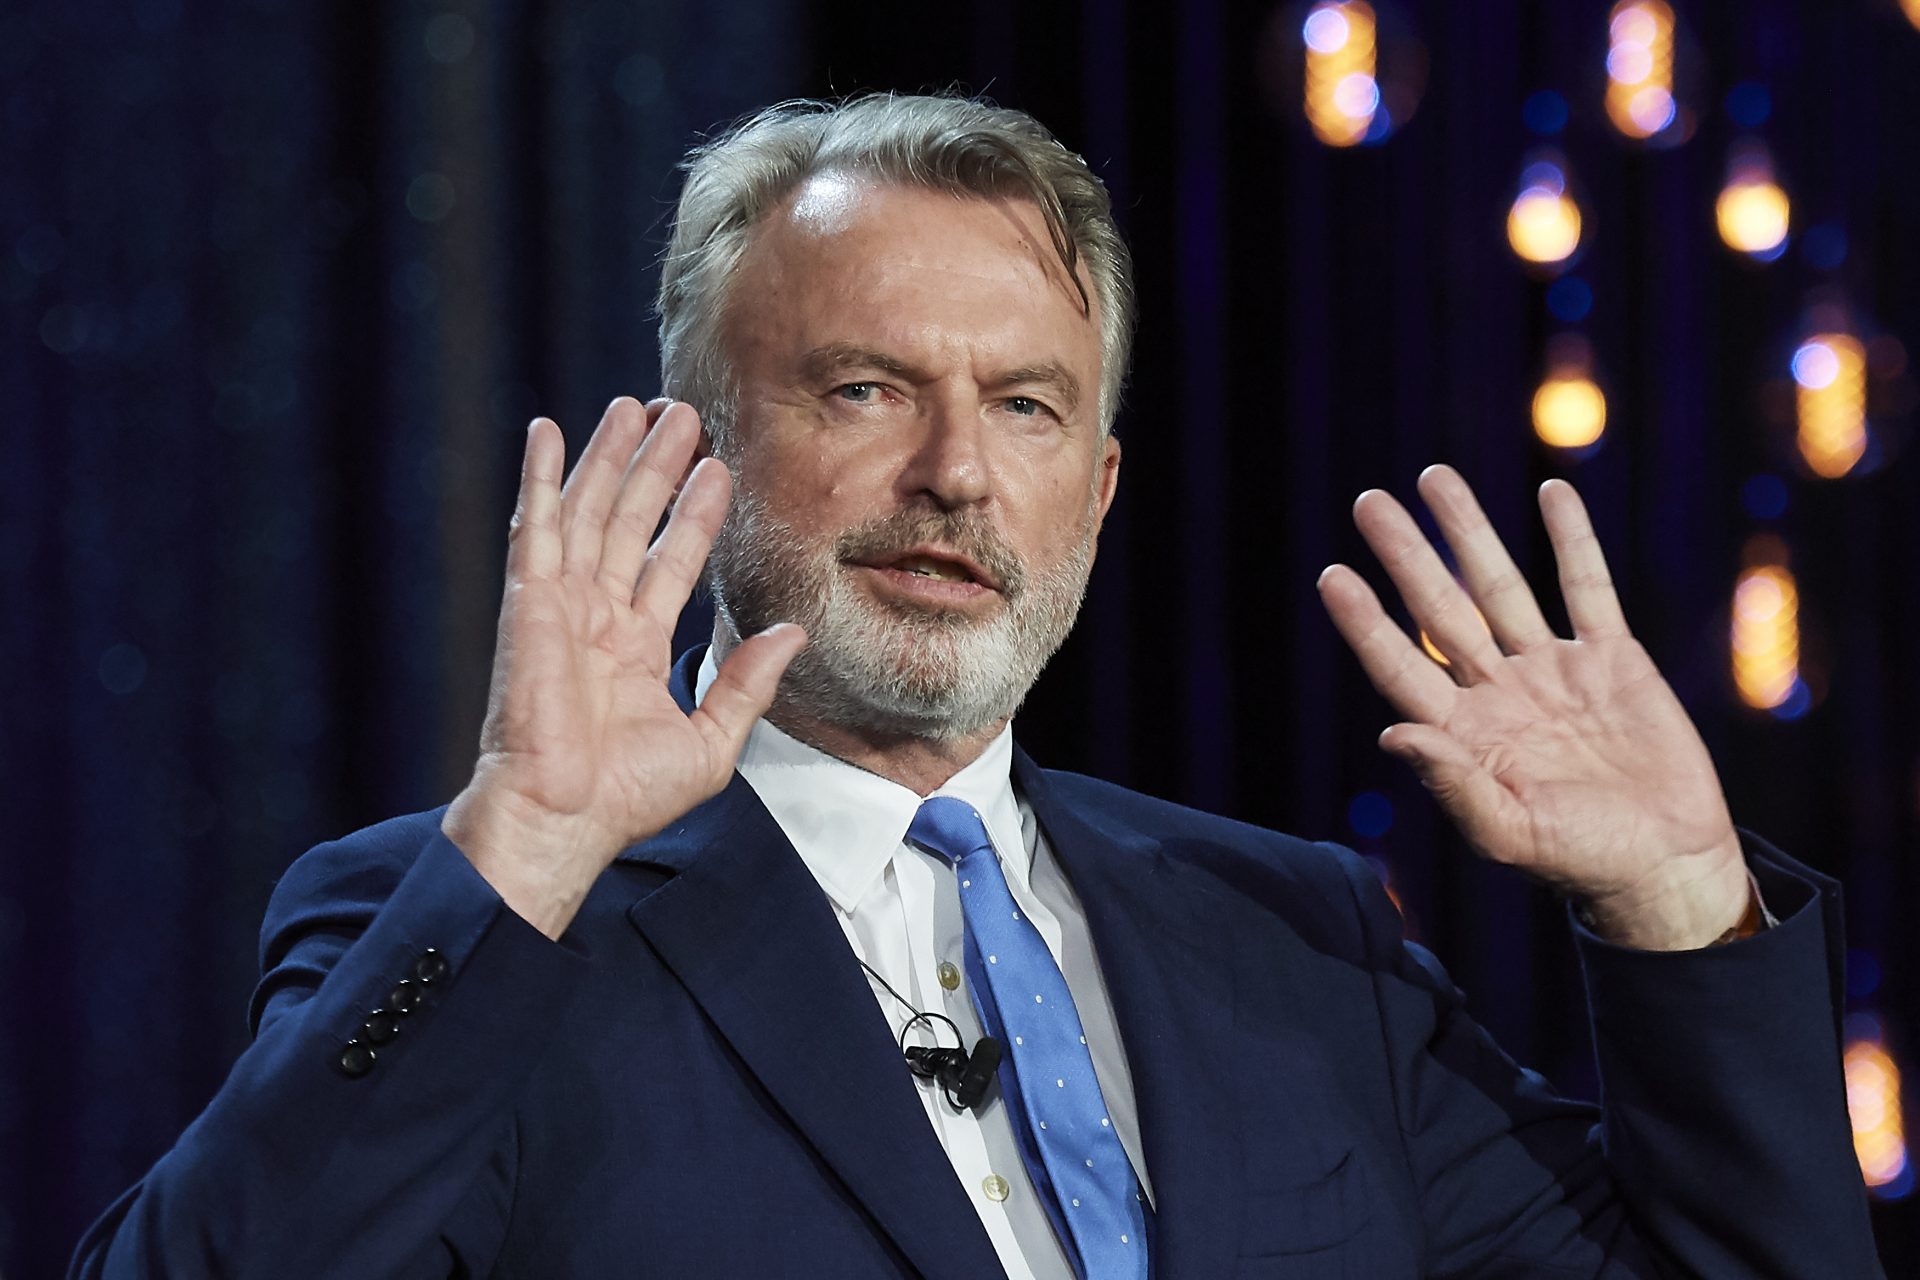 Sam Neill opens up about cancer and his approach to death